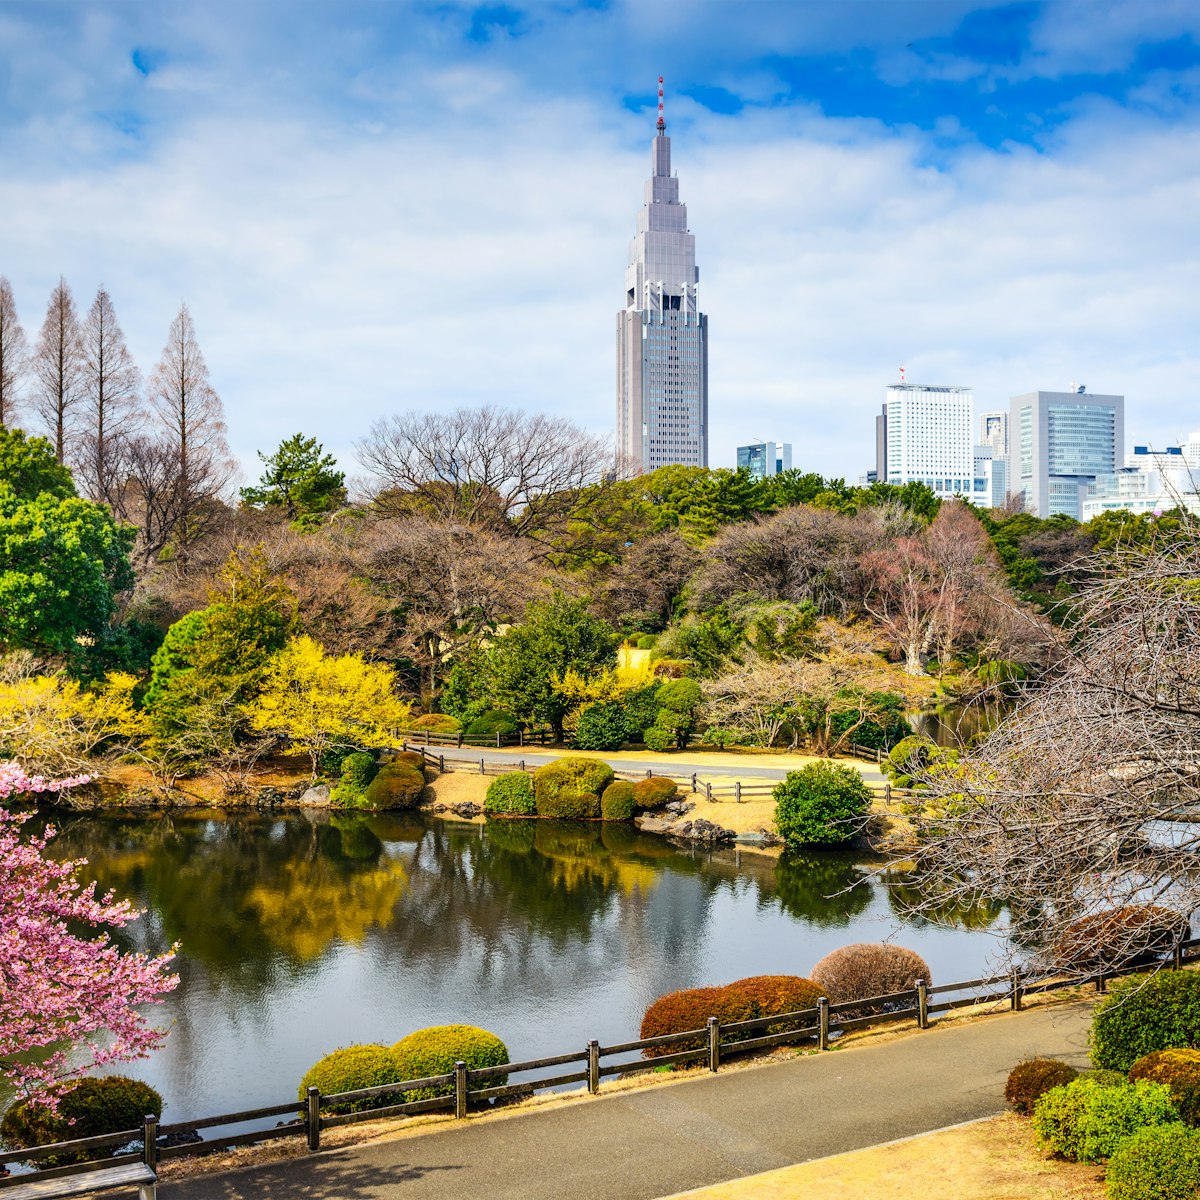 Shinjuku Gyoen Park, Tokyo, Japan in the spring cherry blossom season.; Shutterstock ID 245037472; Your name (First / Last): Josh Vogel; Project no. or GL code: 56530; Network activity no. or Cost Centre: Online-Design; Product or Project: 65050/7529/Josh Vogel/LP.com Destination Galleries